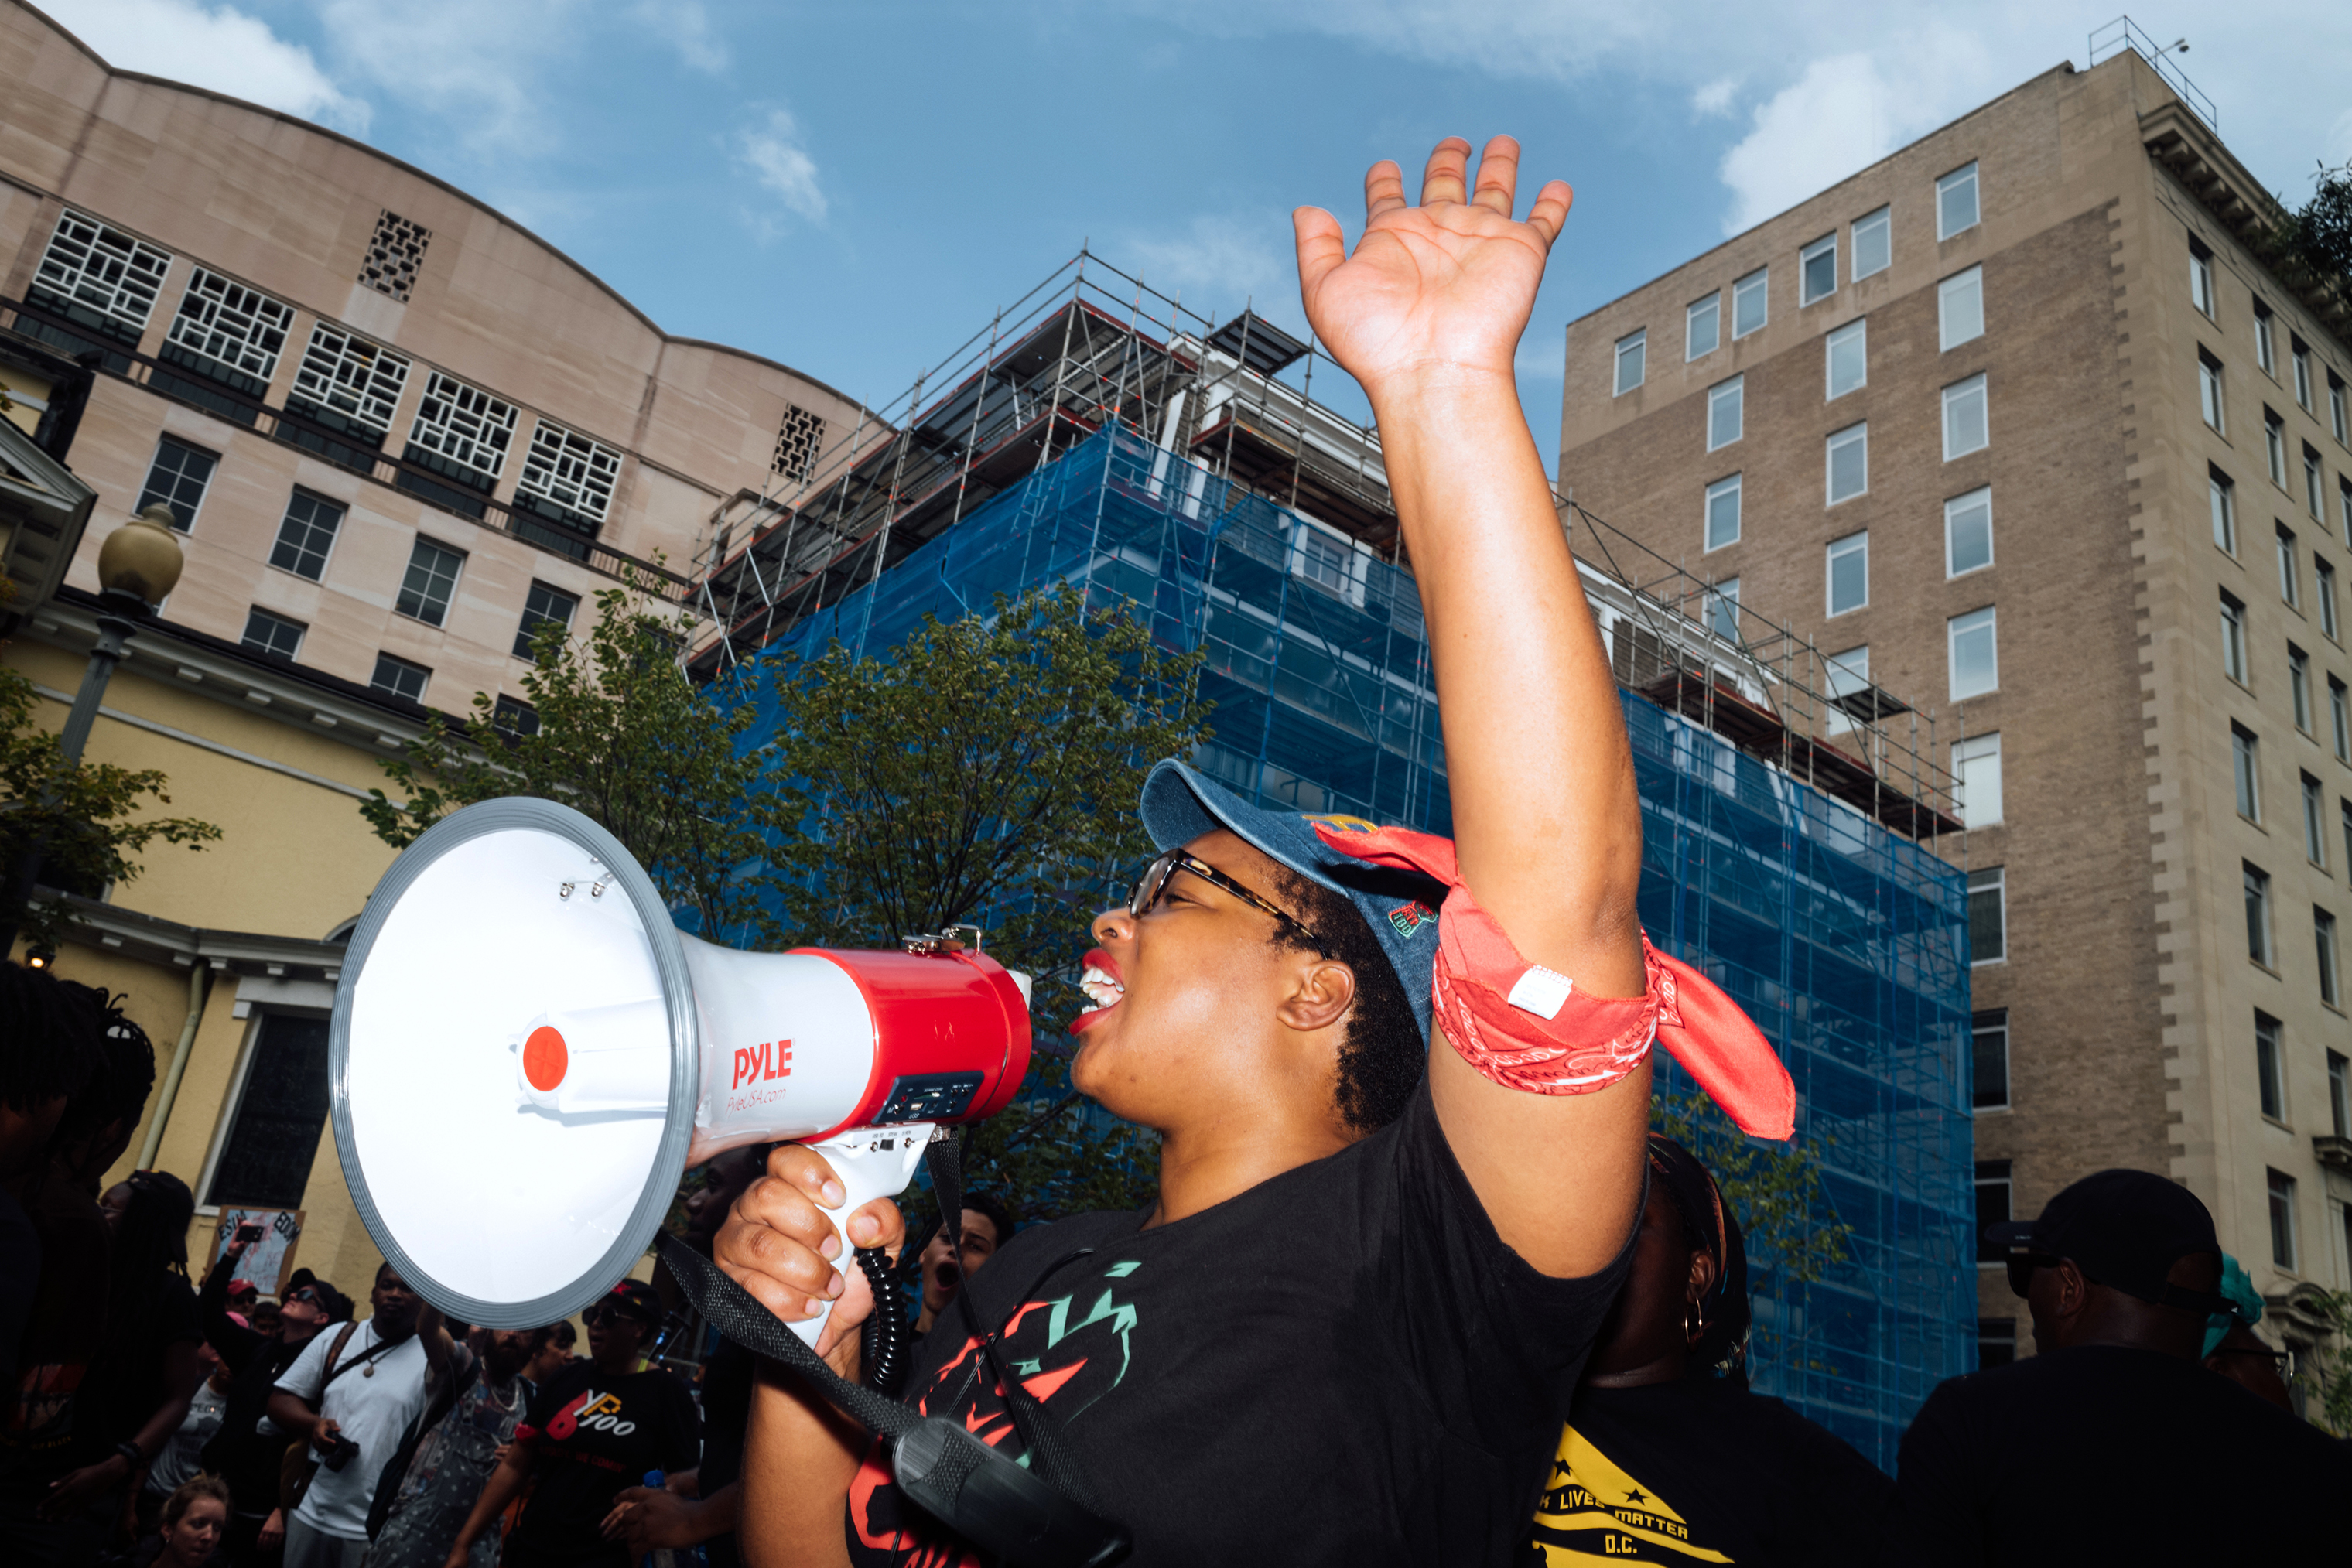 A counter-protester yells into a megaphone. (Daniel Arnold for TIME)